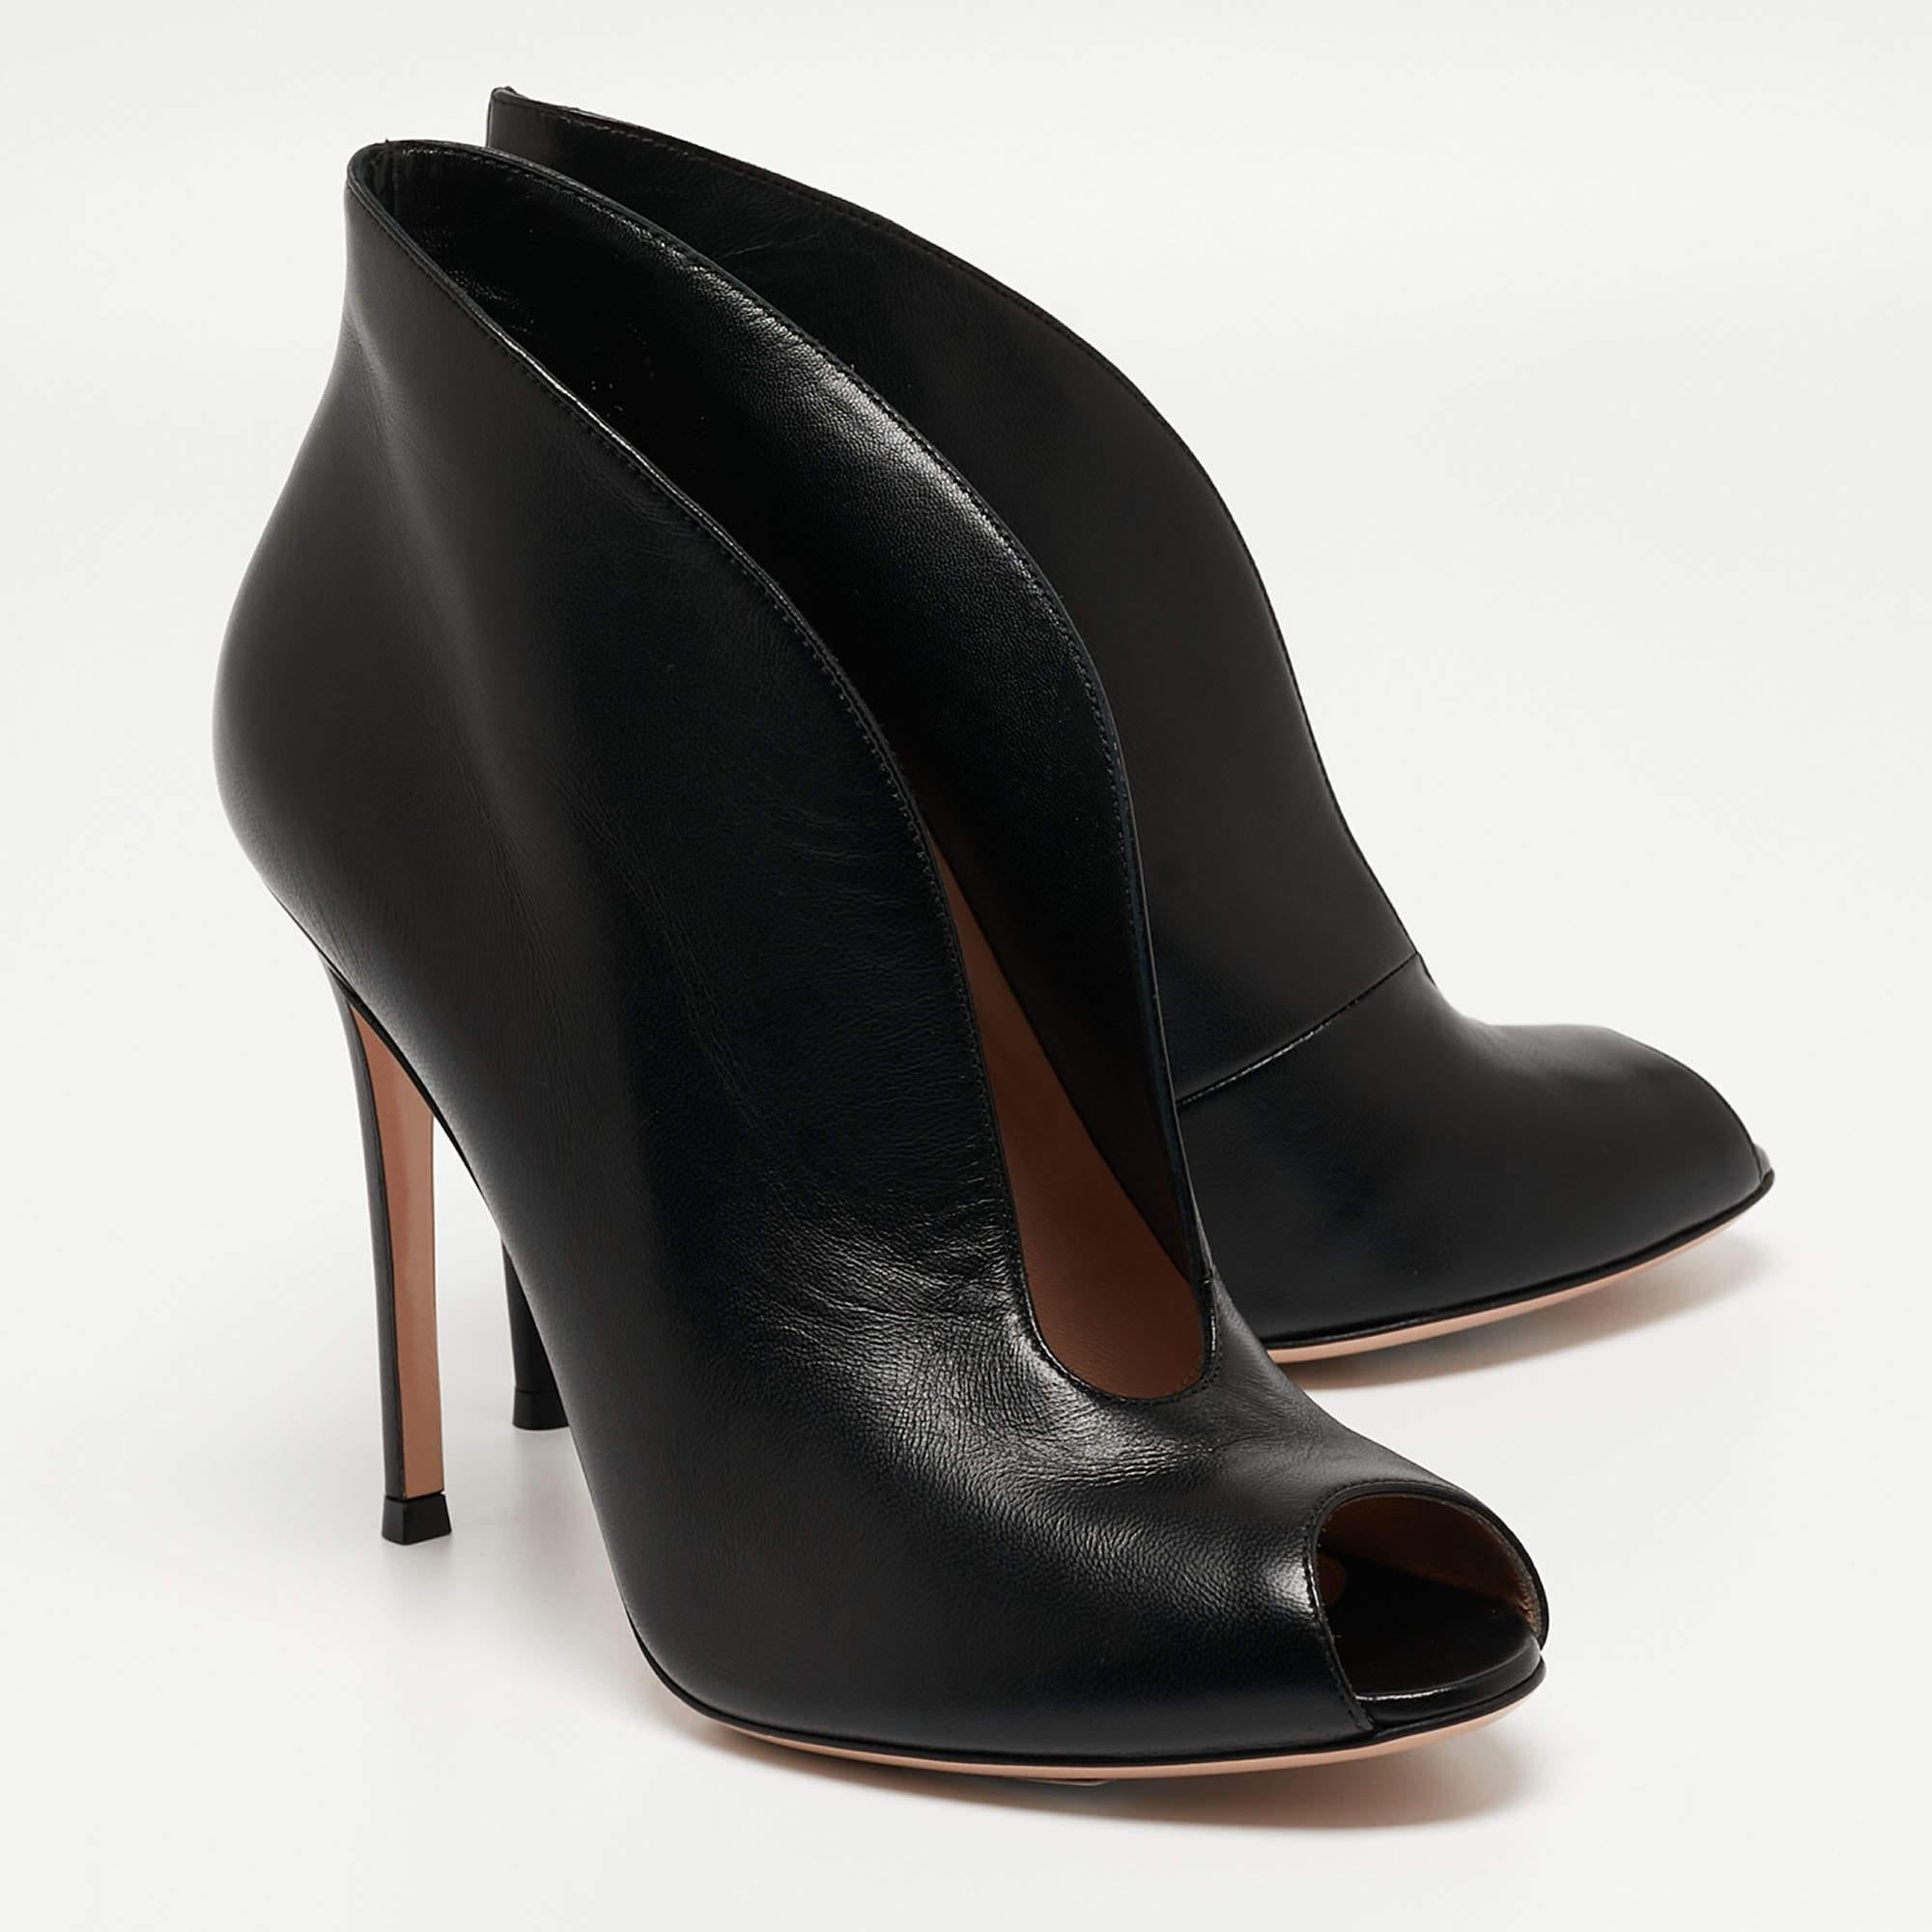 Gianvito Rossi Black Leather Vamp Peep Toe Booties Size 40 For Sale 1